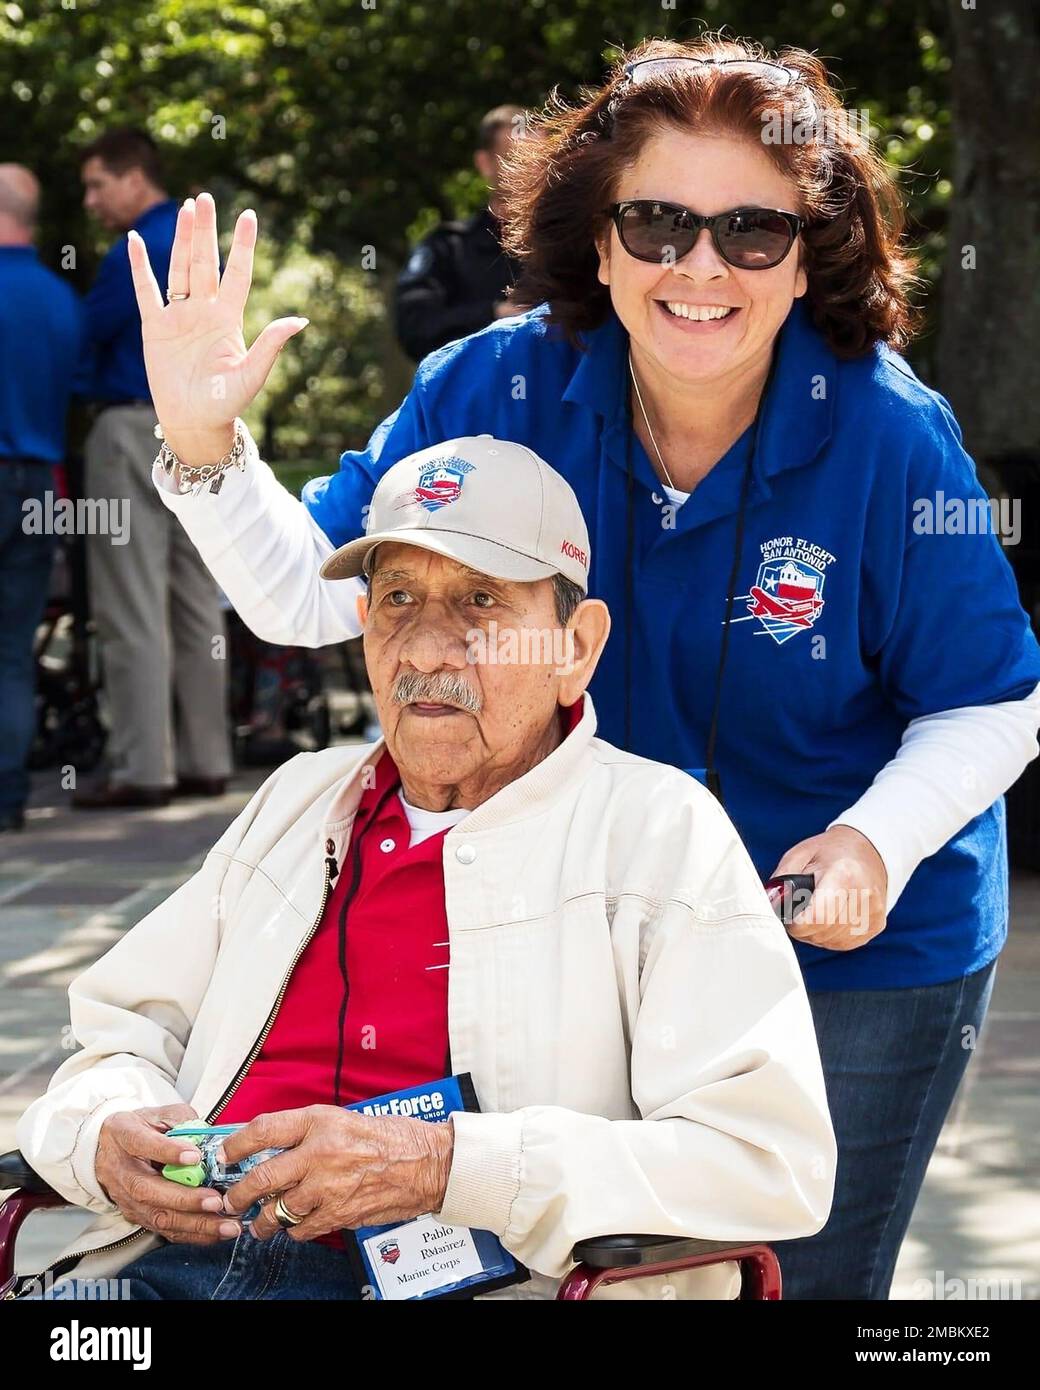 Jennifer Cross serving as a volunteer guardian for Pablo Ramirez, a Marine Corps veteran of the Korean War, on an Honor Flight trip to visit memorials in Washington, D.C.   Cross, the Naval Air Station Kingsville, Texas, administrative officer, is being recognized for her dedication to service members, past and present, as the sole recipient of the Navy’s 2021 Spirit of Hope Award.  The Spirit of Hope Awards are named in honor of entertainer Bob Hope, who entertained and supported troops from World War II through the first Gulf War. Each military service names one individual or organization an Stock Photo